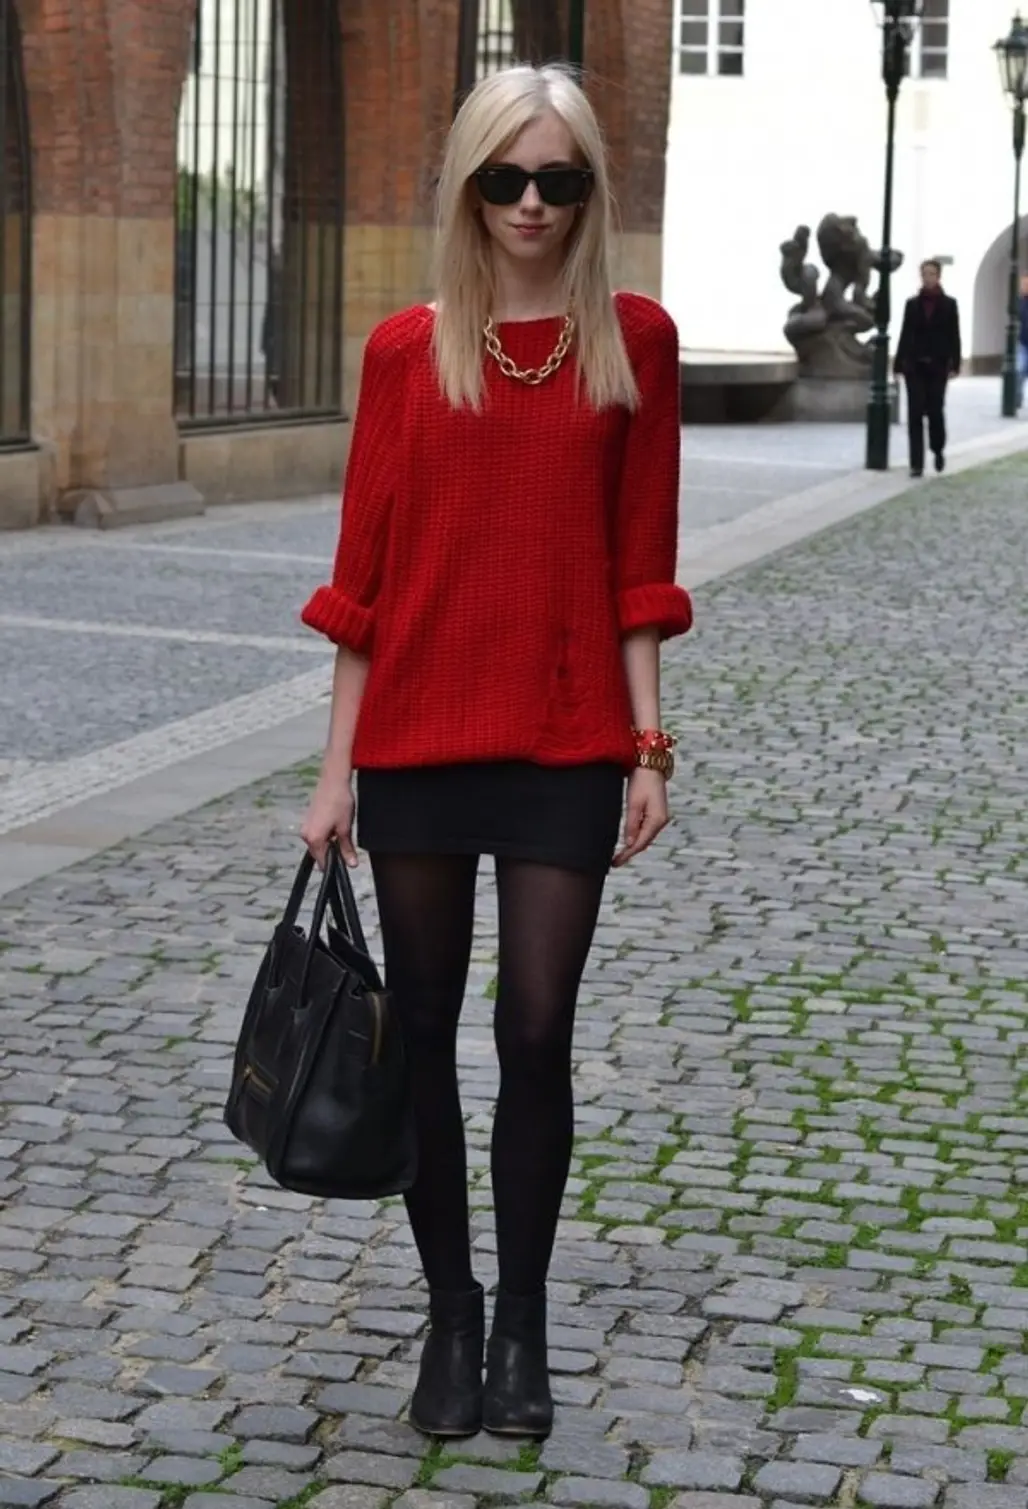 A Red Sweater